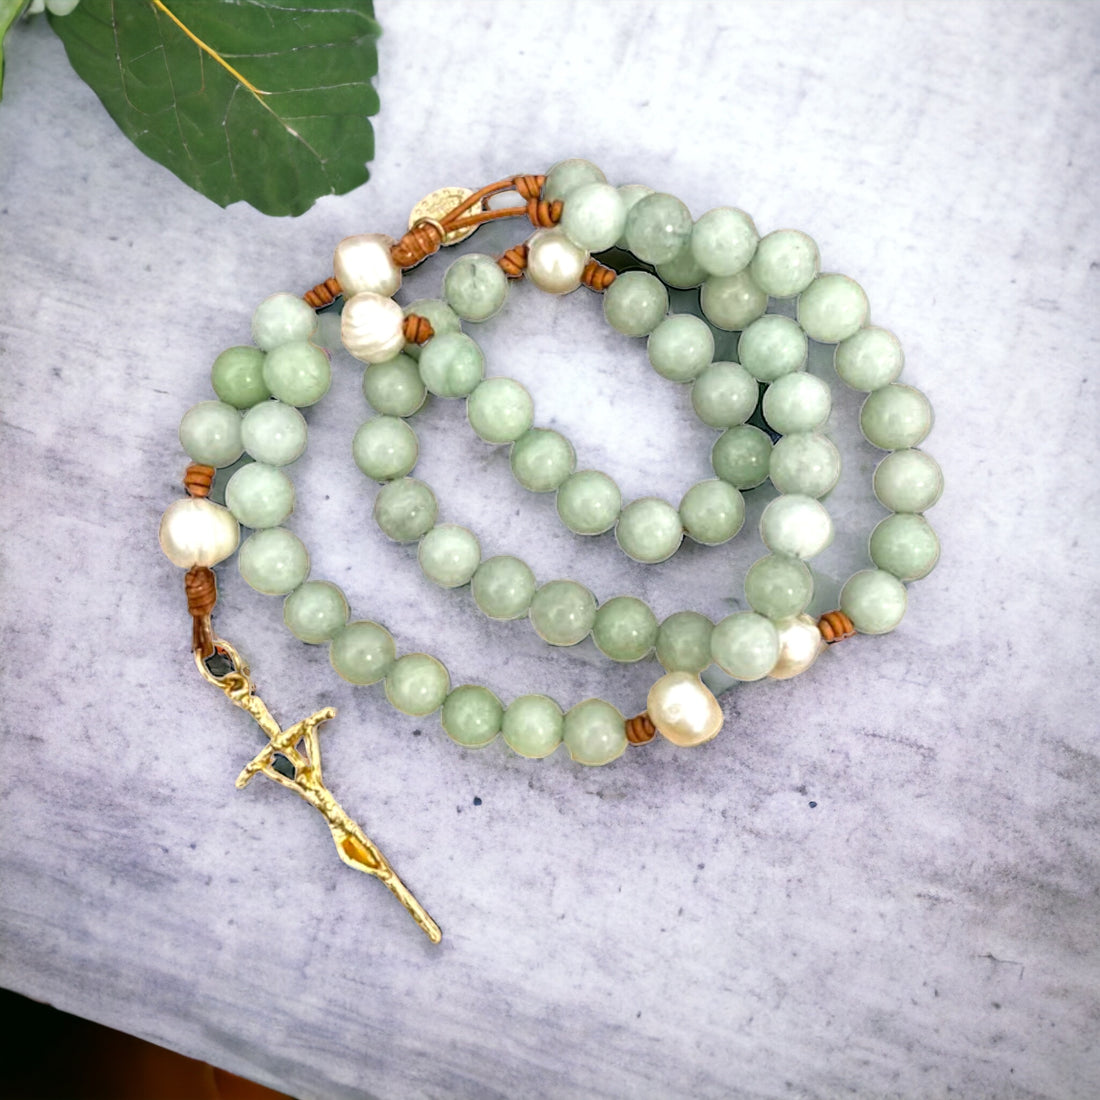 Handmade rosary, green rosary, gemstone rosary, catholic rosary, catholic rosaries, handmade rosaries, rosary gift, catholic gifts, catholic gift, christian gifts, catholic gifts for her, miraculous medal rosary, miraculous medal, prayer tools